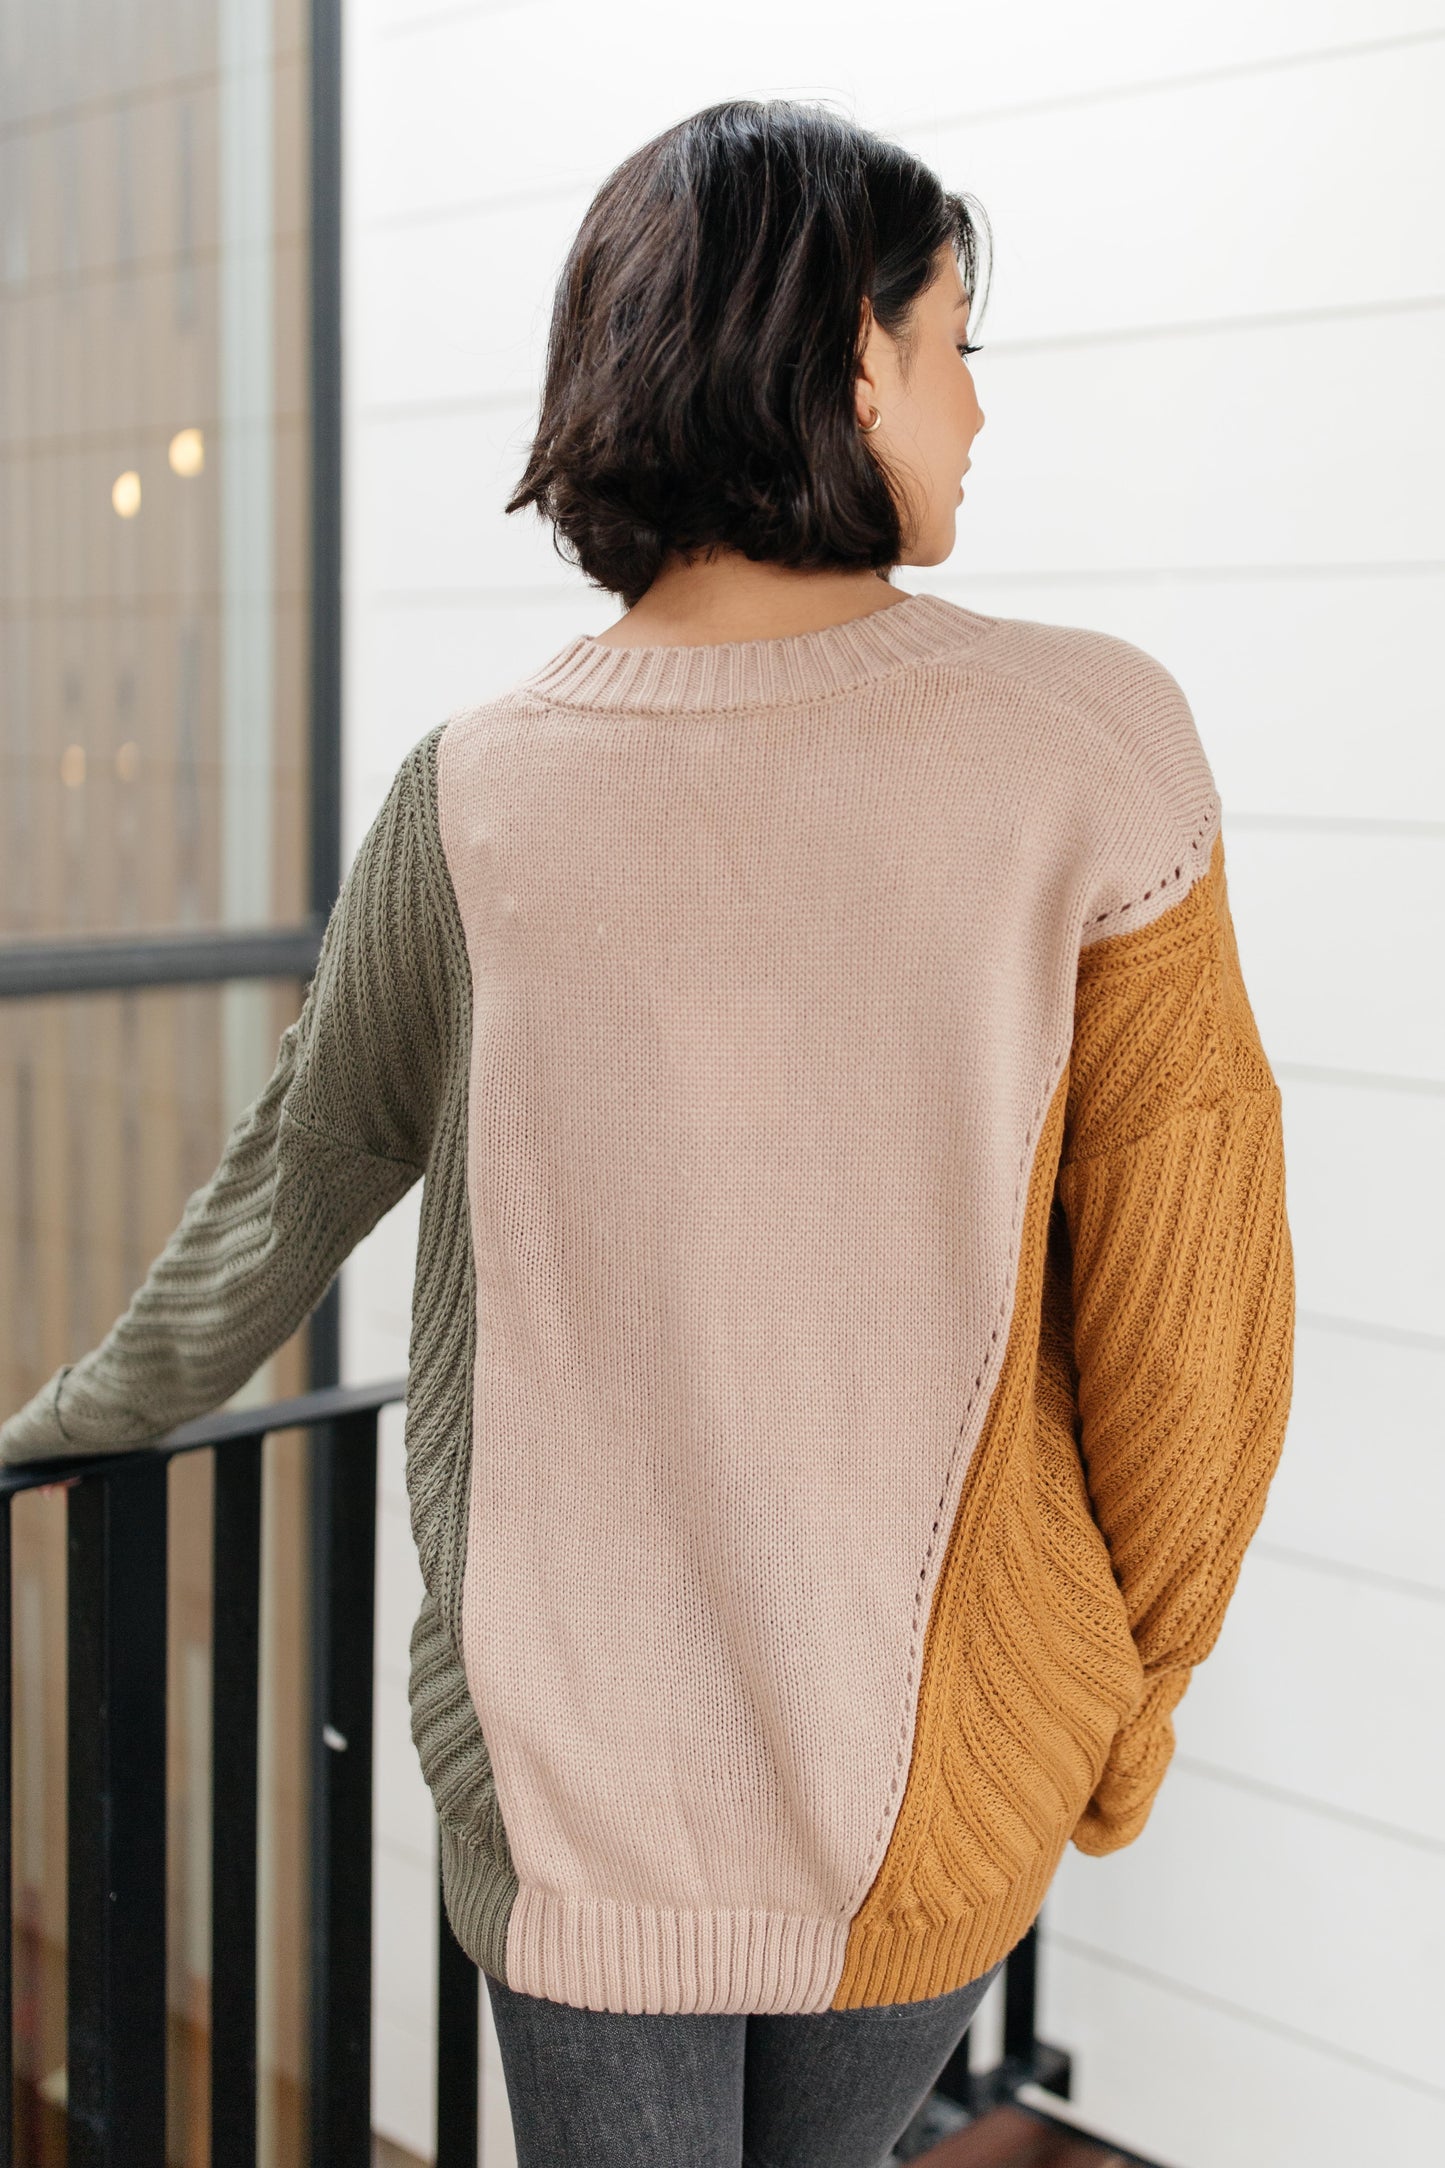 A Sweater With Colors in Taupe